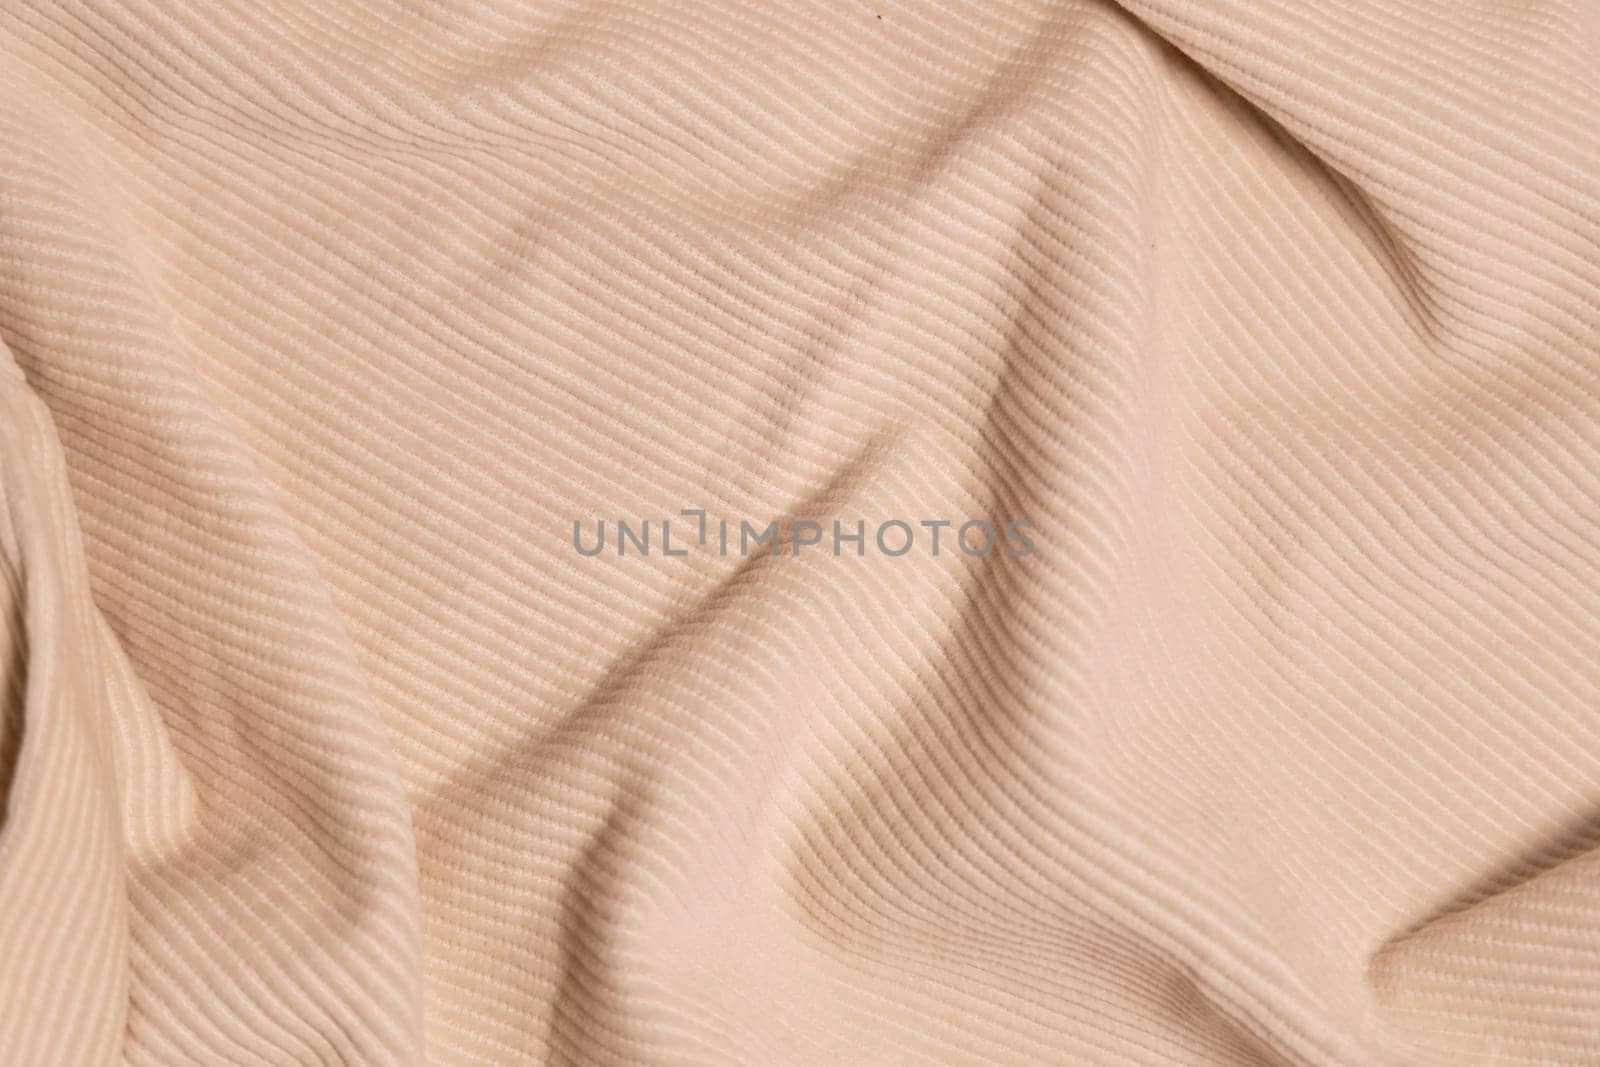 Velvety fabric texture pattern. Texture of velvet textile nude color